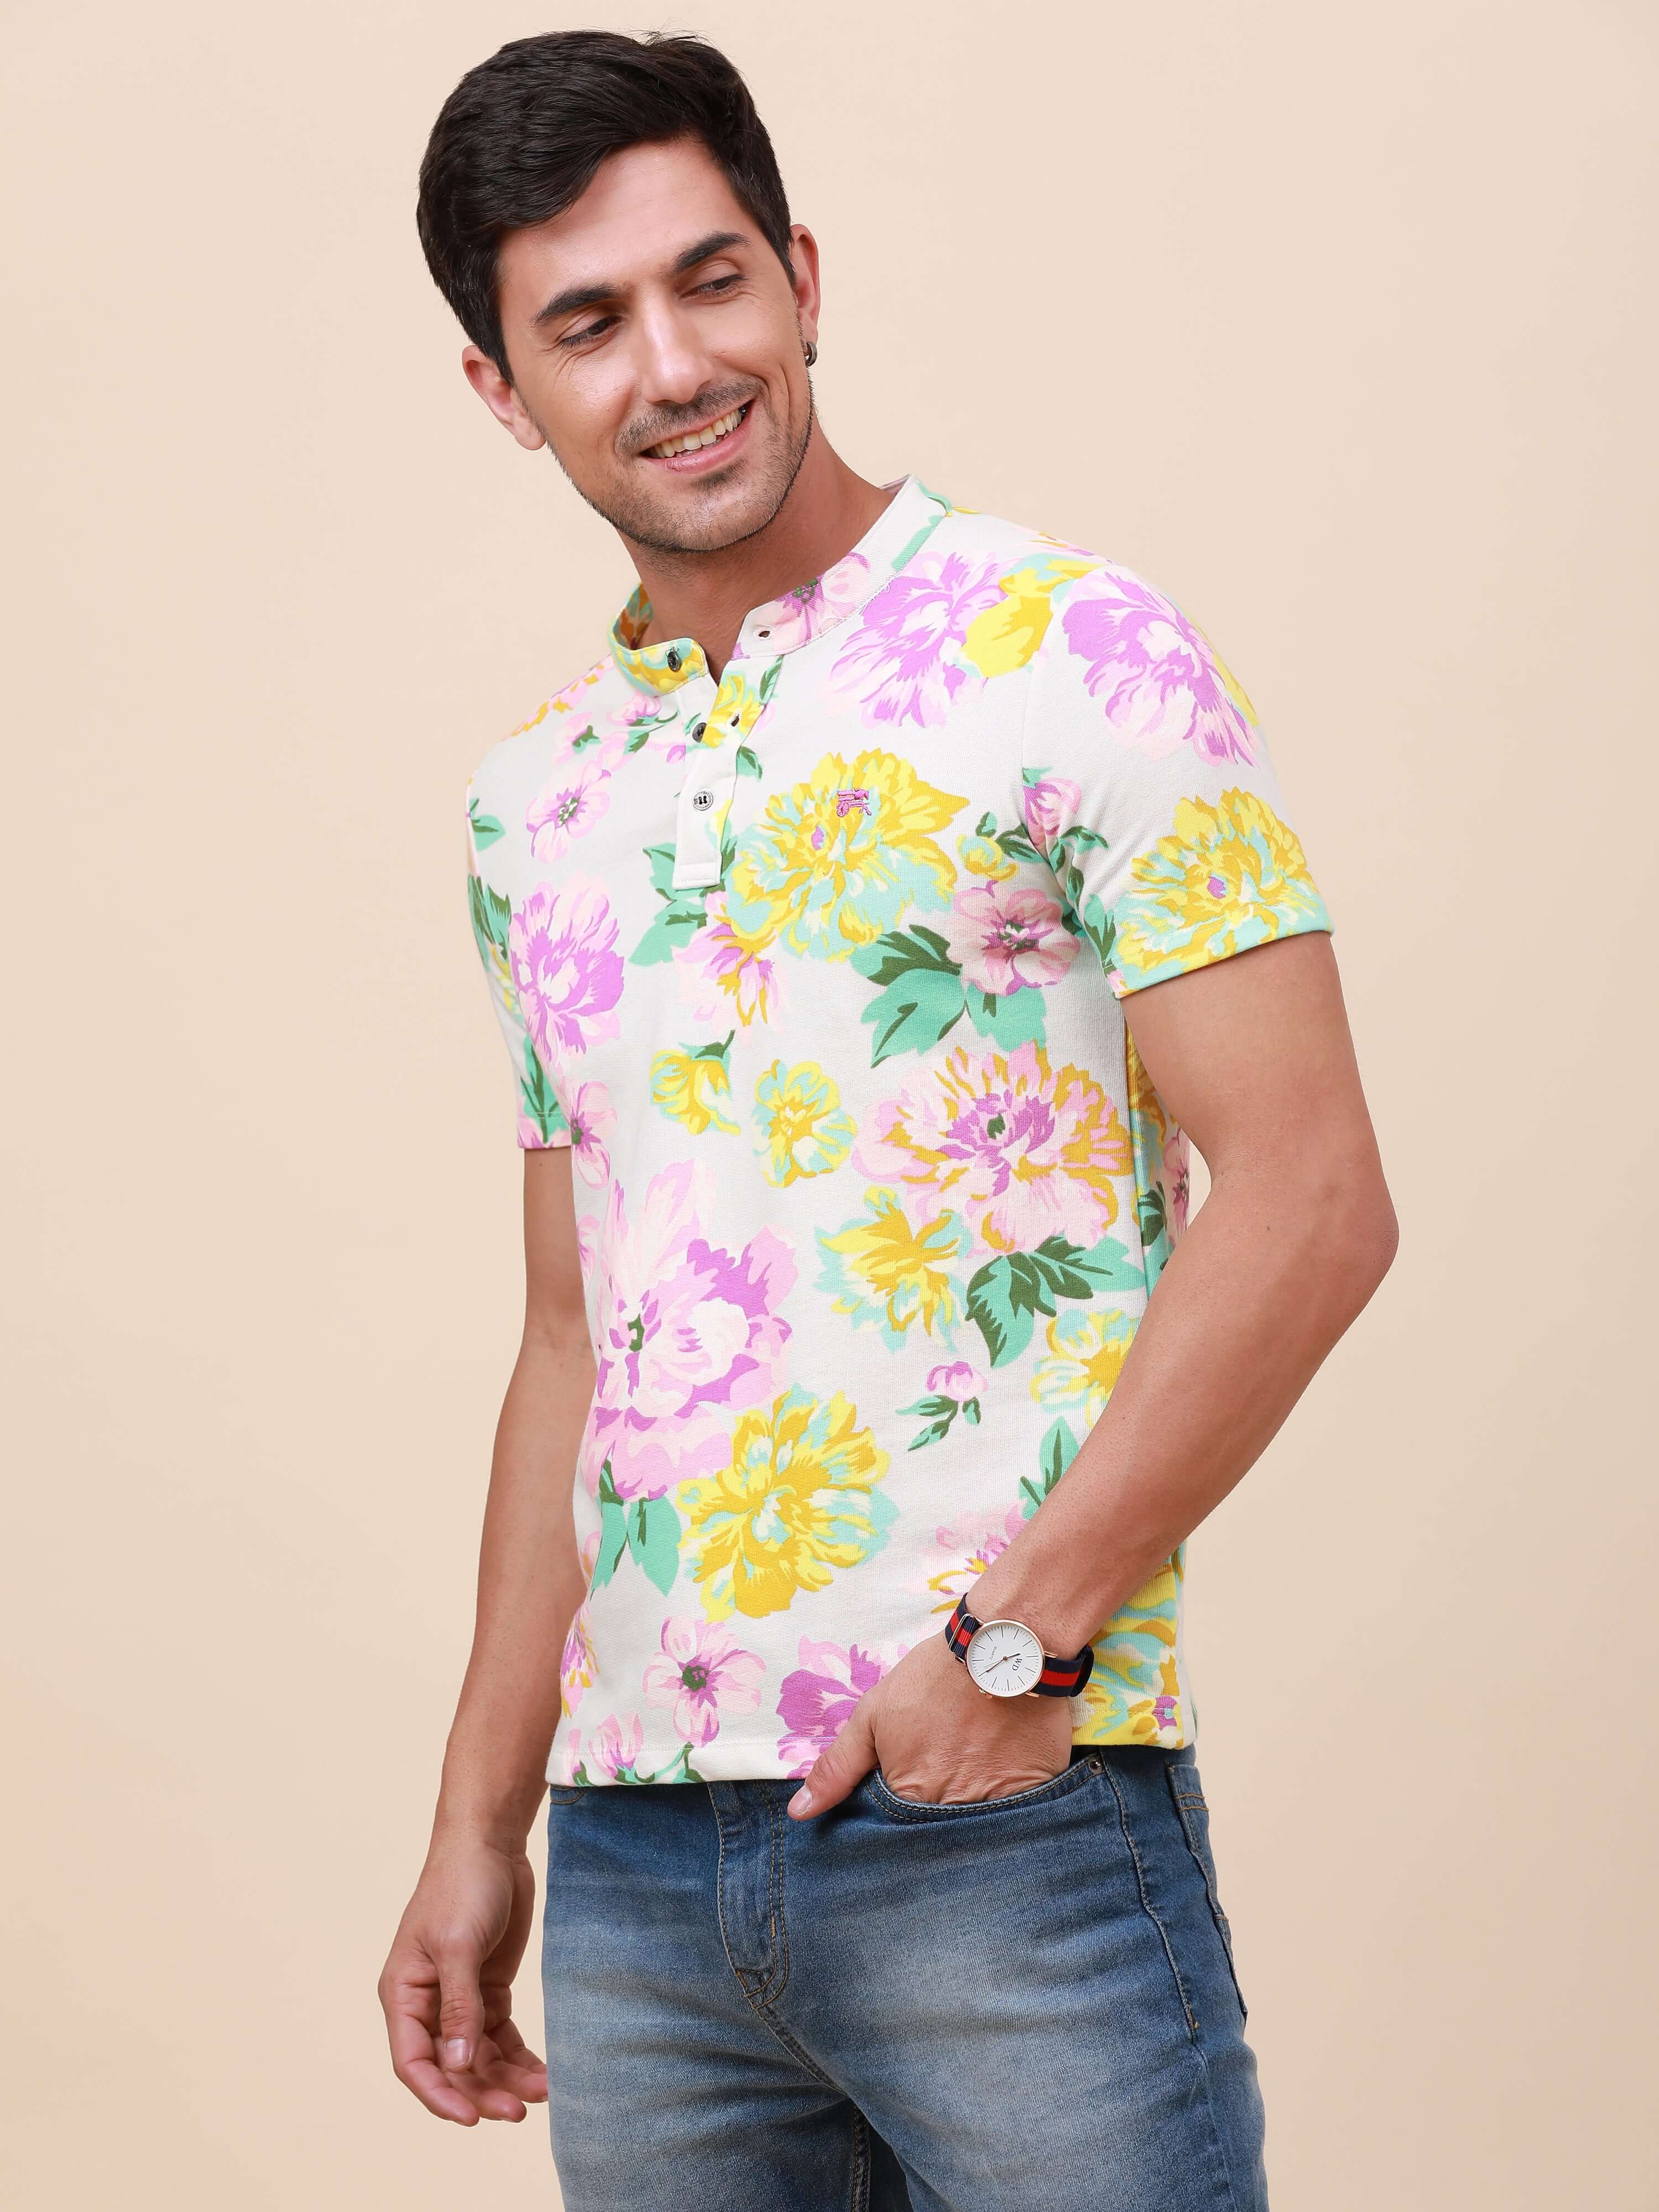 Tropical Print Henley Neck Printed T Shirt shop online at Estilocus. 100% Cotton Designed and printed on knitted fabric. The fabric is stretchy and lightweight, with a soft skin feel and no wrinkles. The Henley collar is smooth on the neck and keeps you c